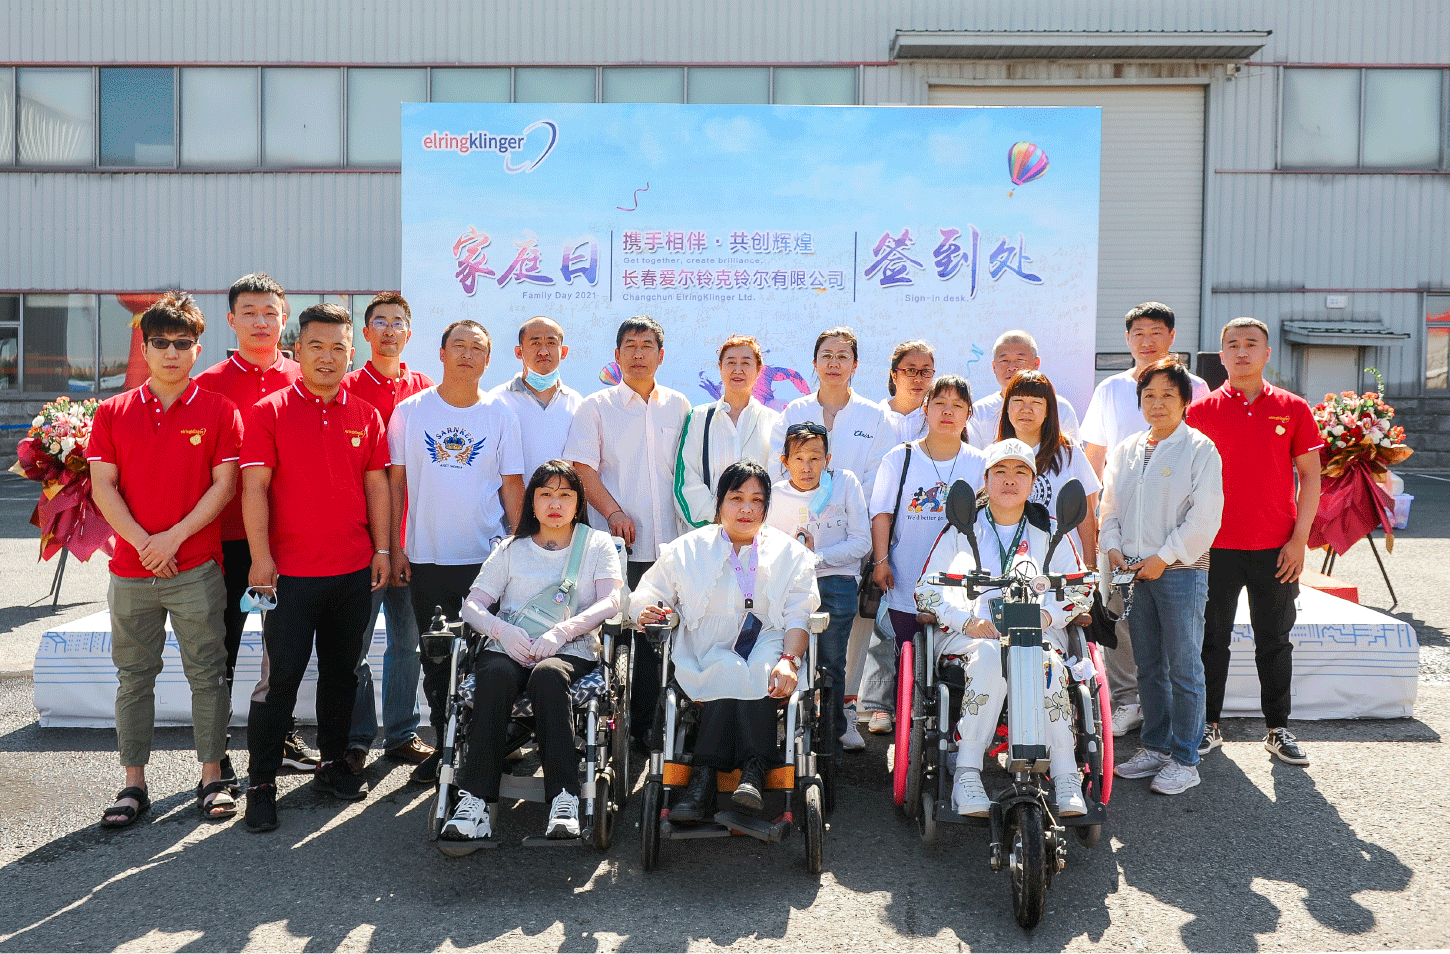 Representatives of the workshops for people with disabilities were invited to the ceremonial event for the presentation of a check at the Chinese factory in Changchun.